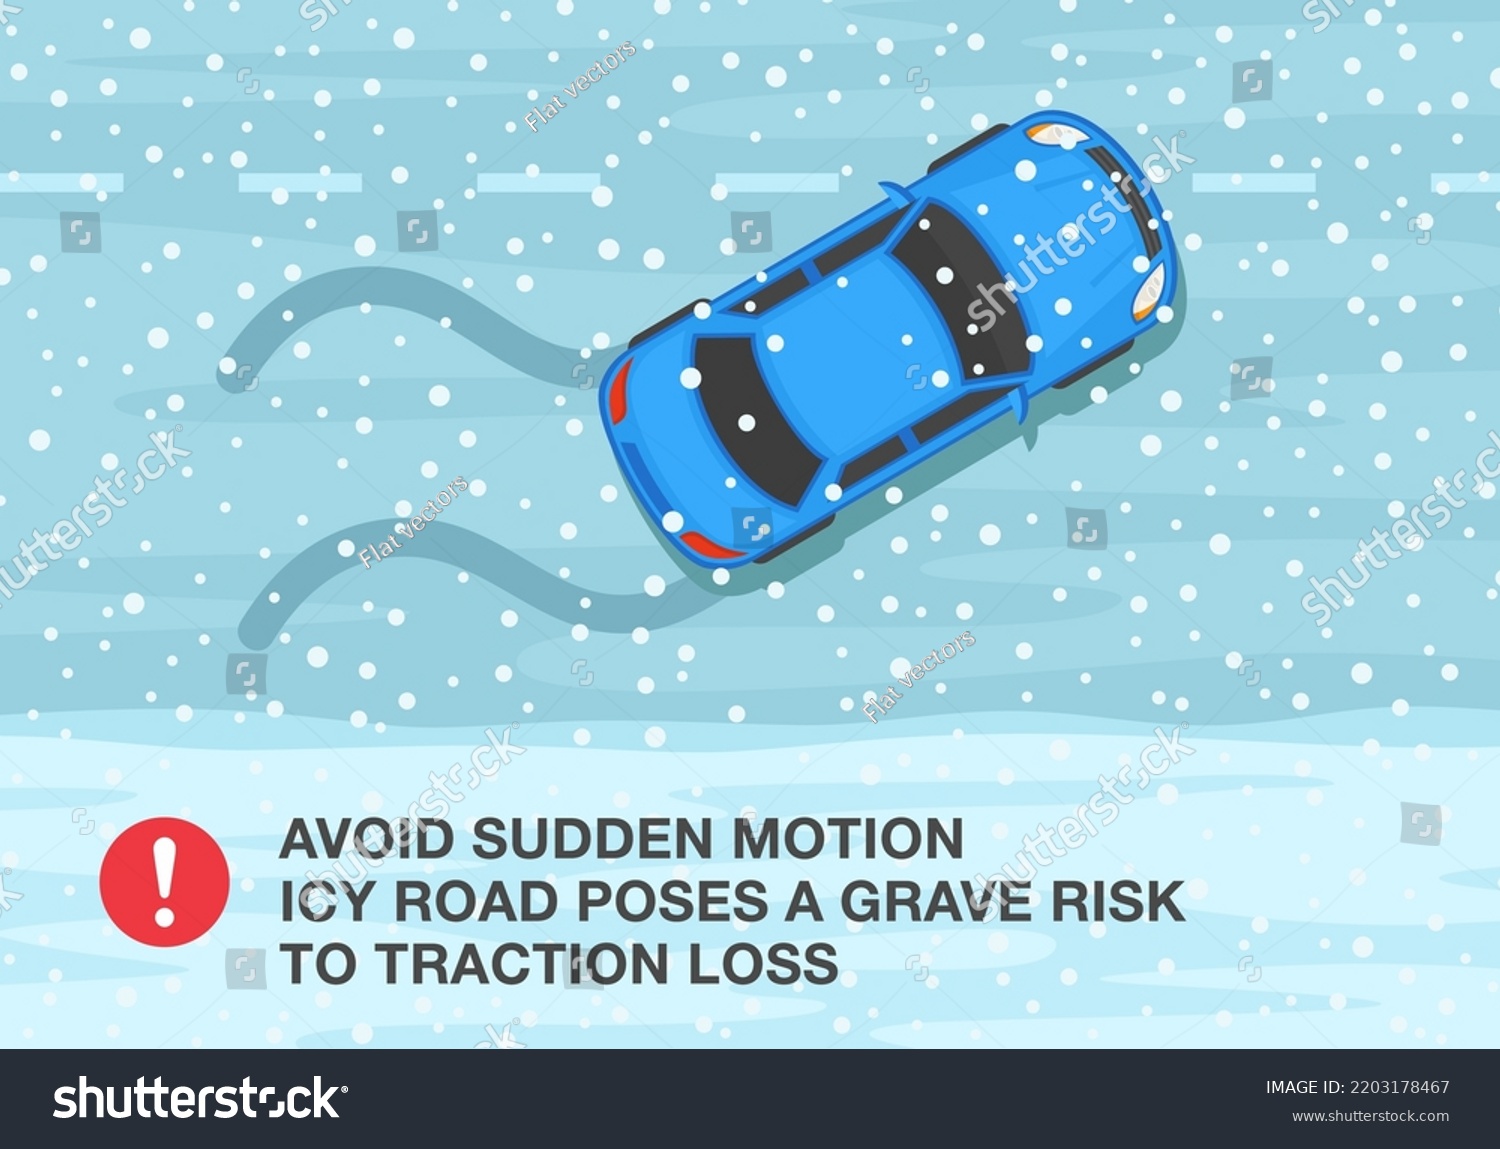 Safe car driving rules and tips. Winter season driving. Avoid sudden motion, icy road poses a grave risk to traction loss. Top view of a skidded sedan car. Flat vector illustration template. #2203178467